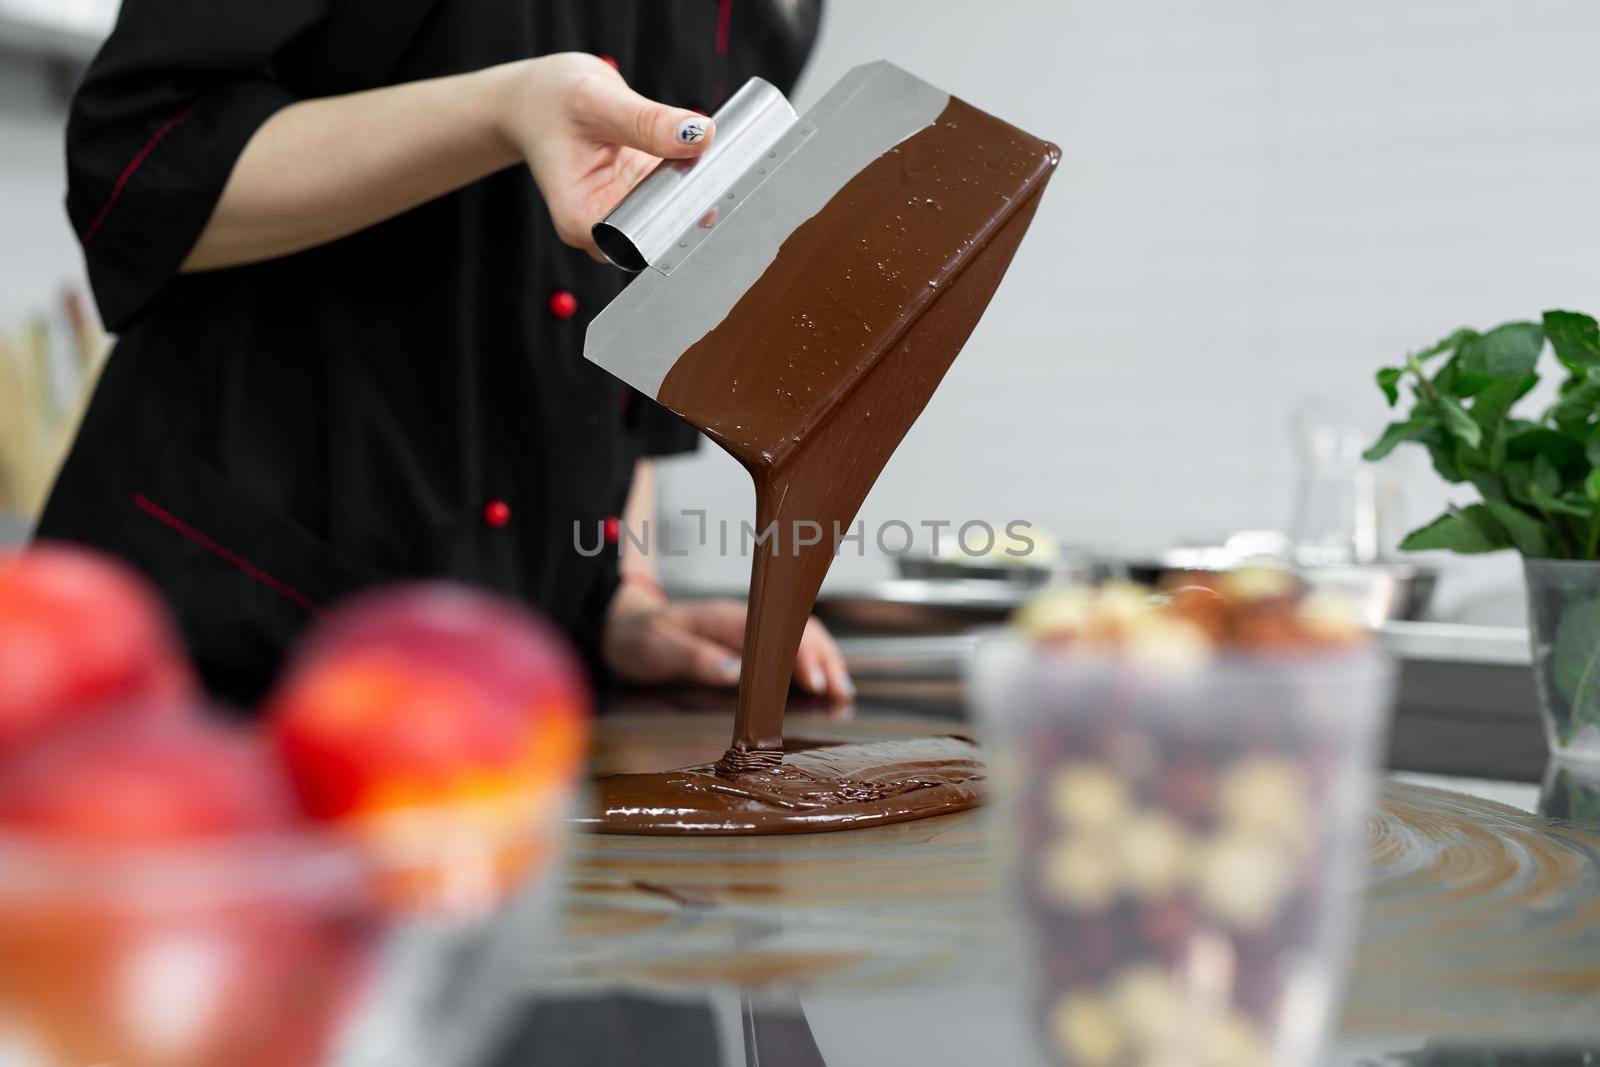 Close-up of a pastry chef using spatulas tempering molten chocolate